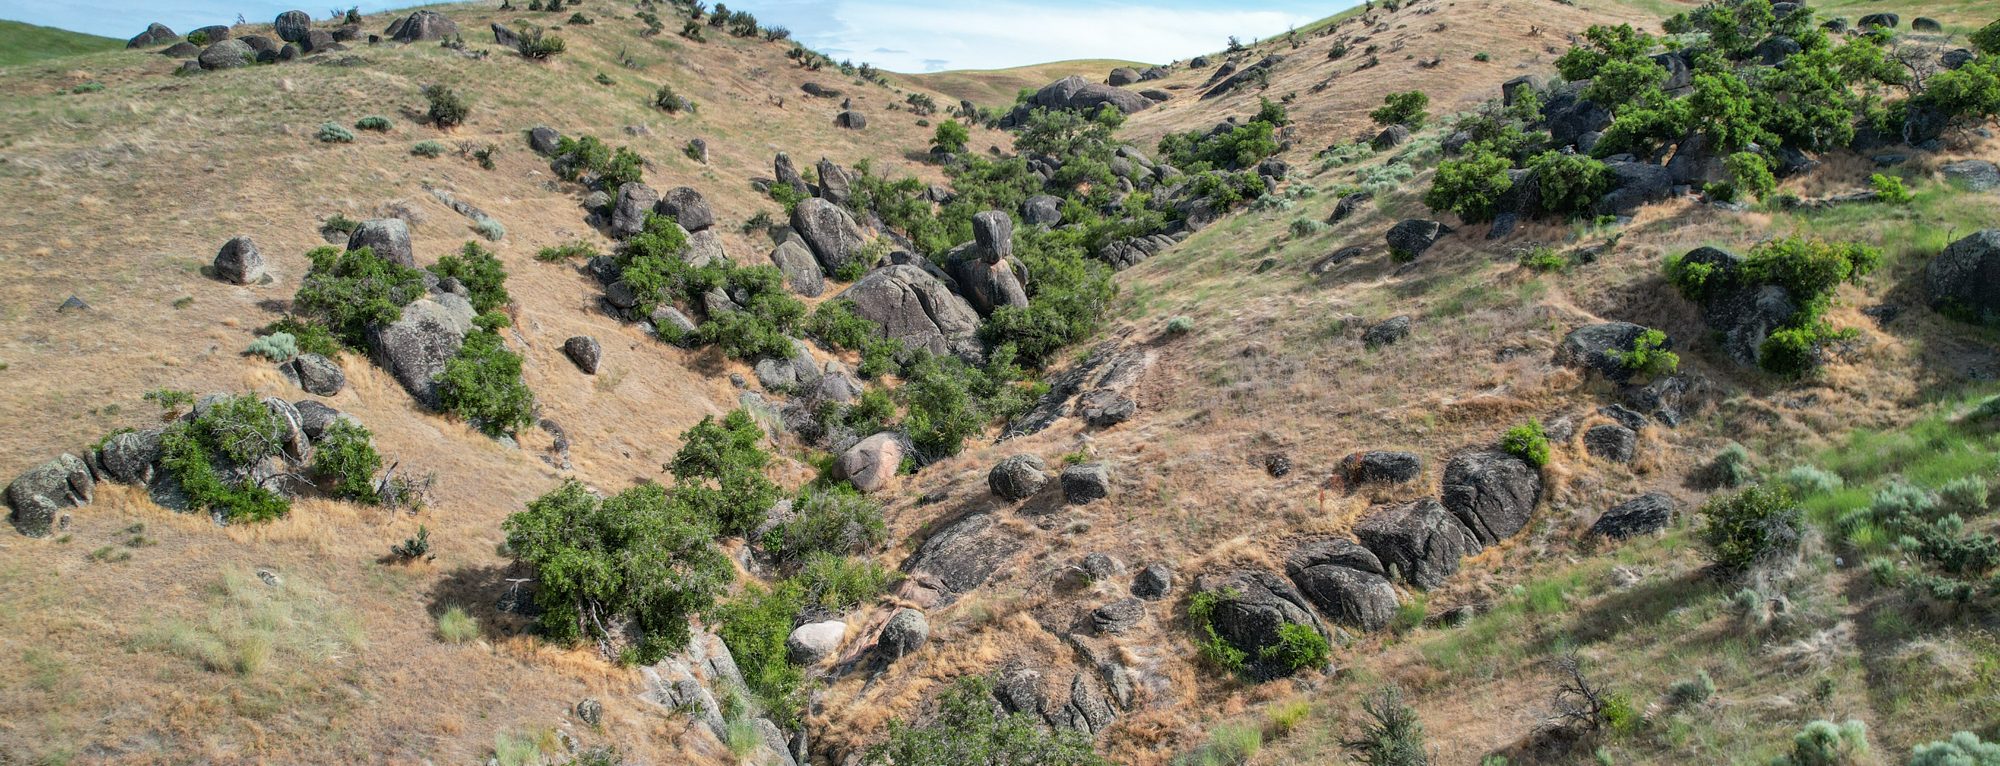 Timber Butte Ranch Rock Formations